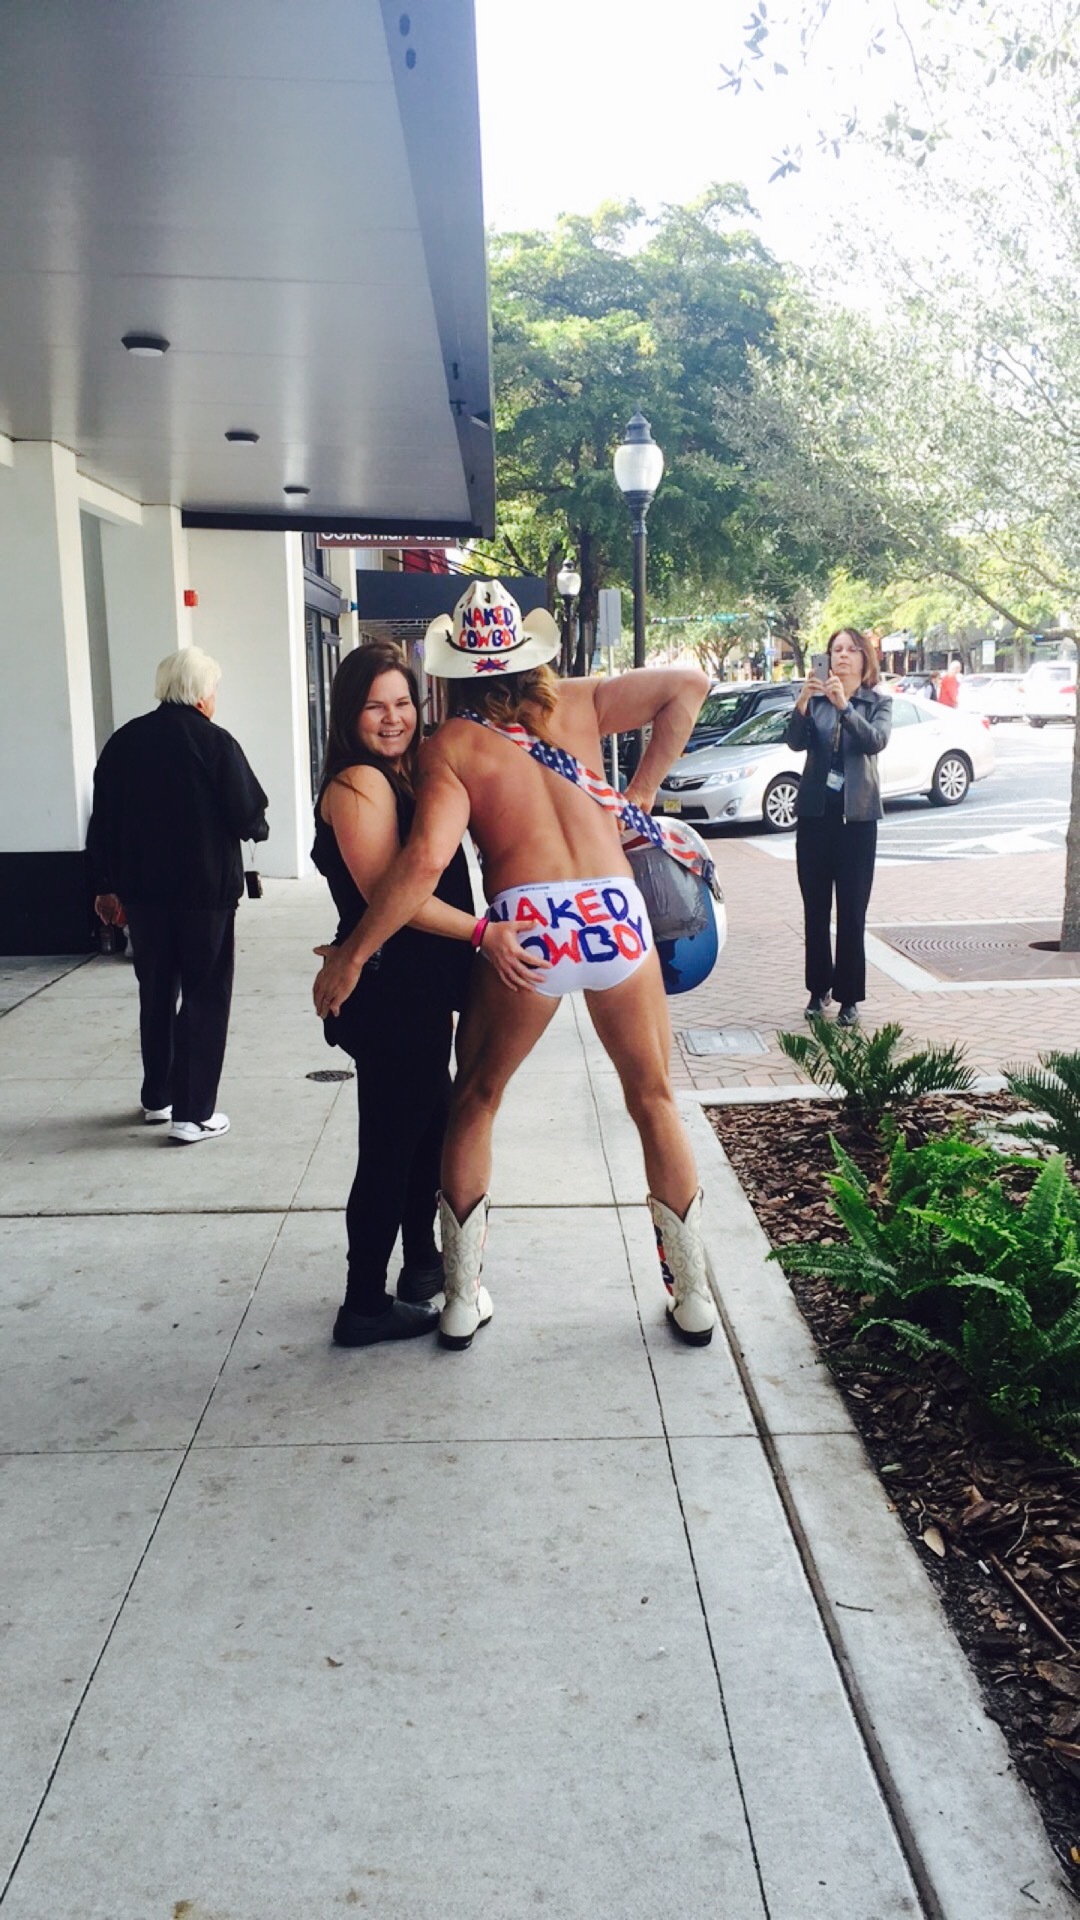 Courtesy photo. Kira Brown spotted the Naked Cowboy while working at Evie's Tavern on Main in Downtown Sarasota.